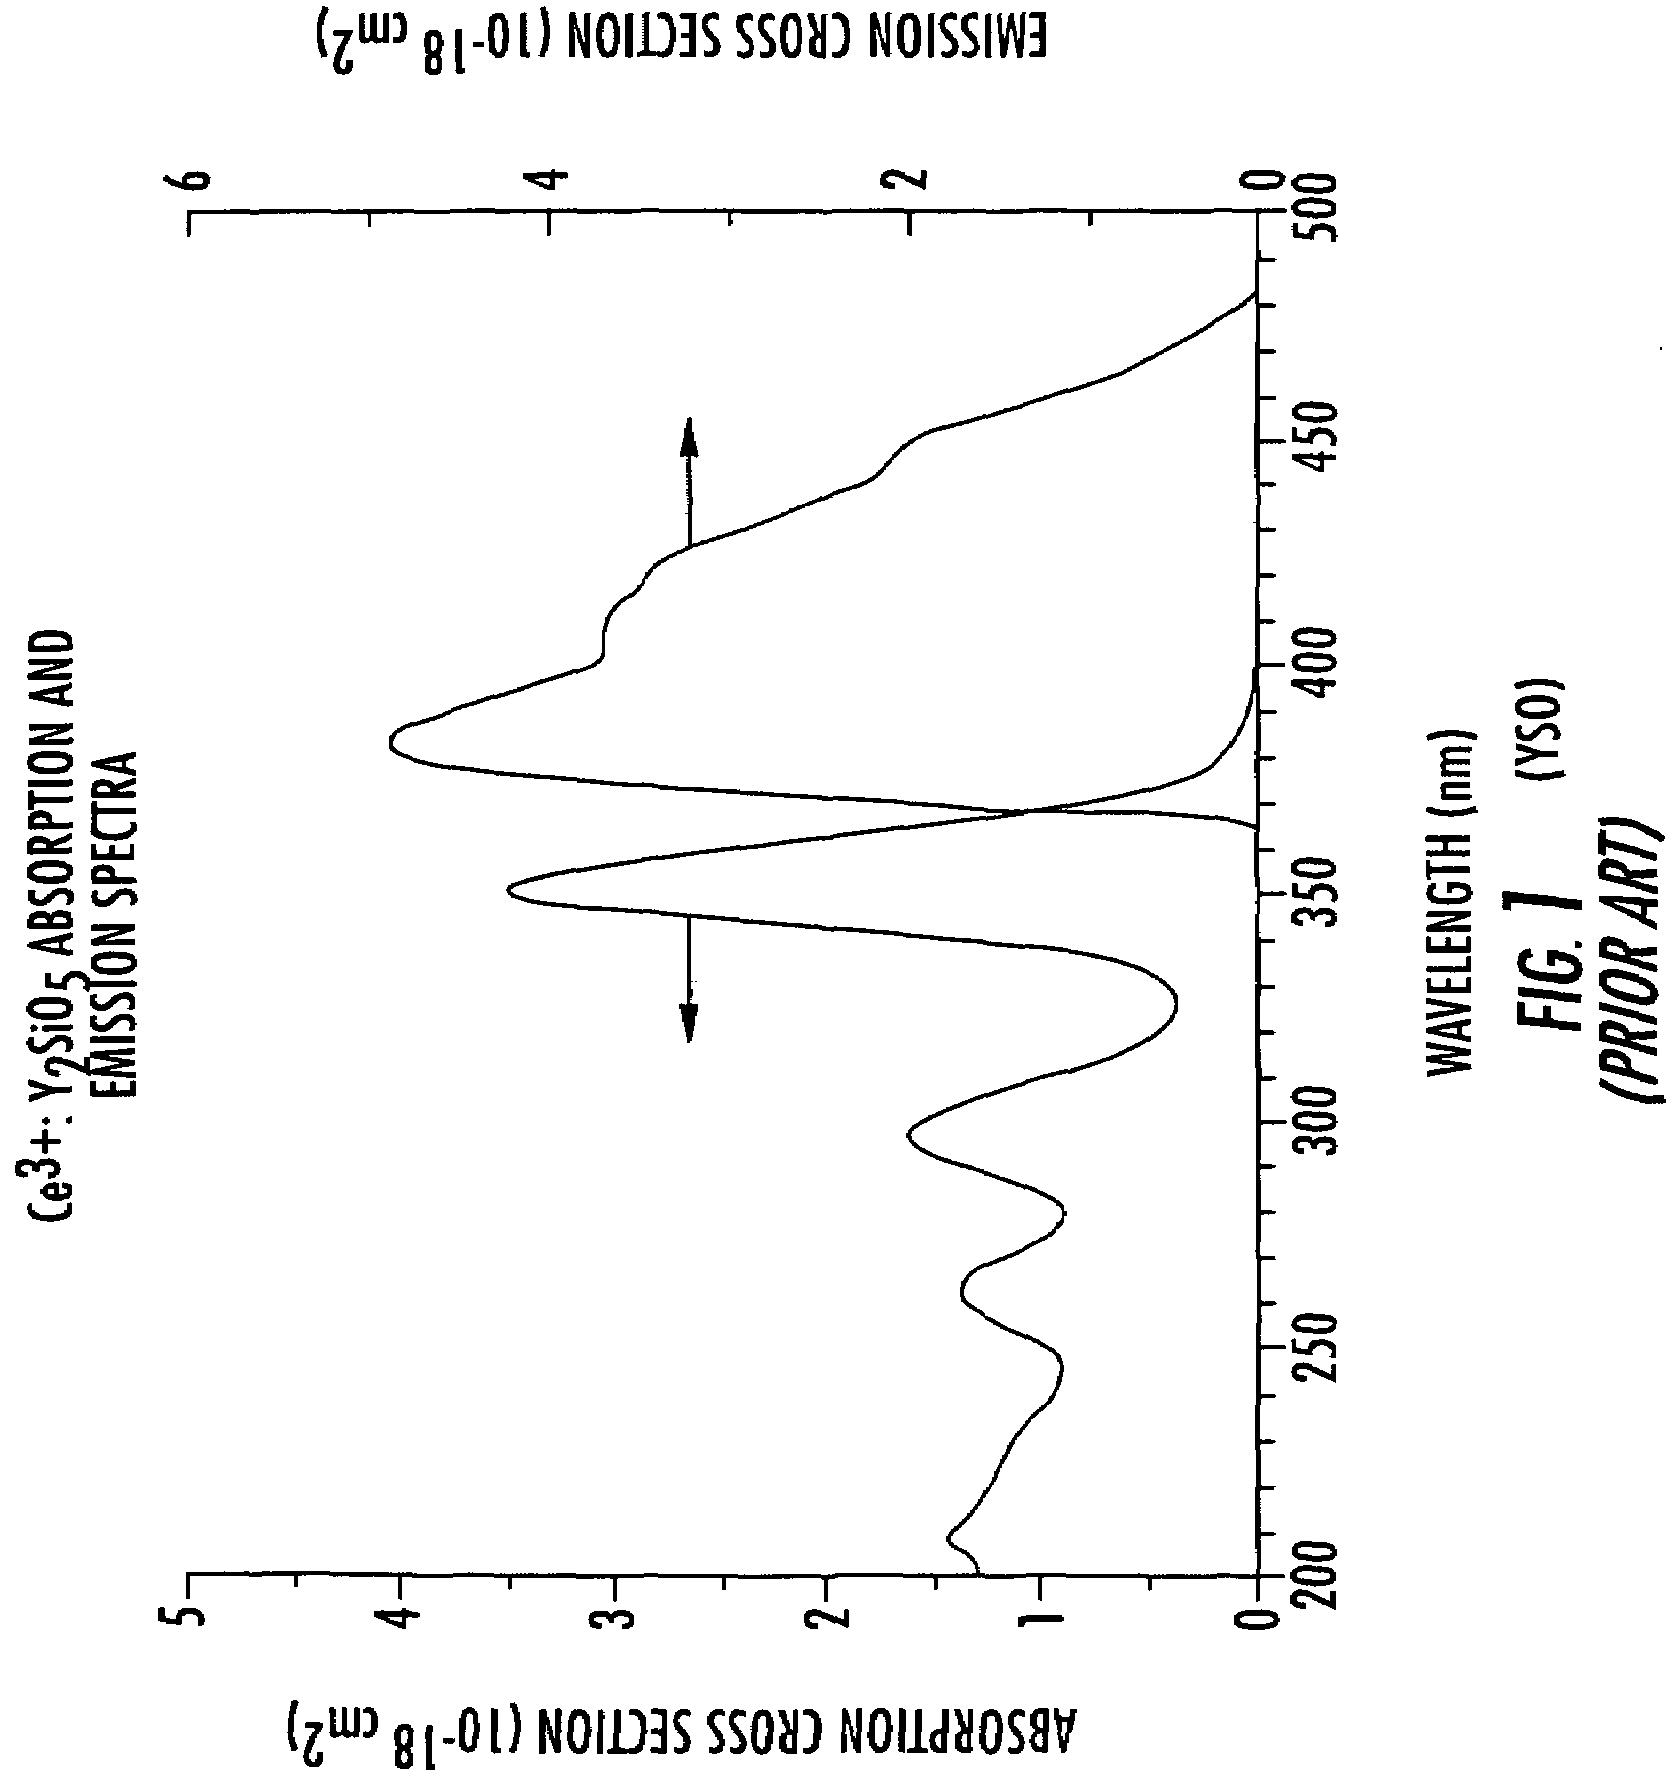 Method of enhancing performance of cerium doped lutetium yttrium orthosilicate crystals and crystals produced thereby